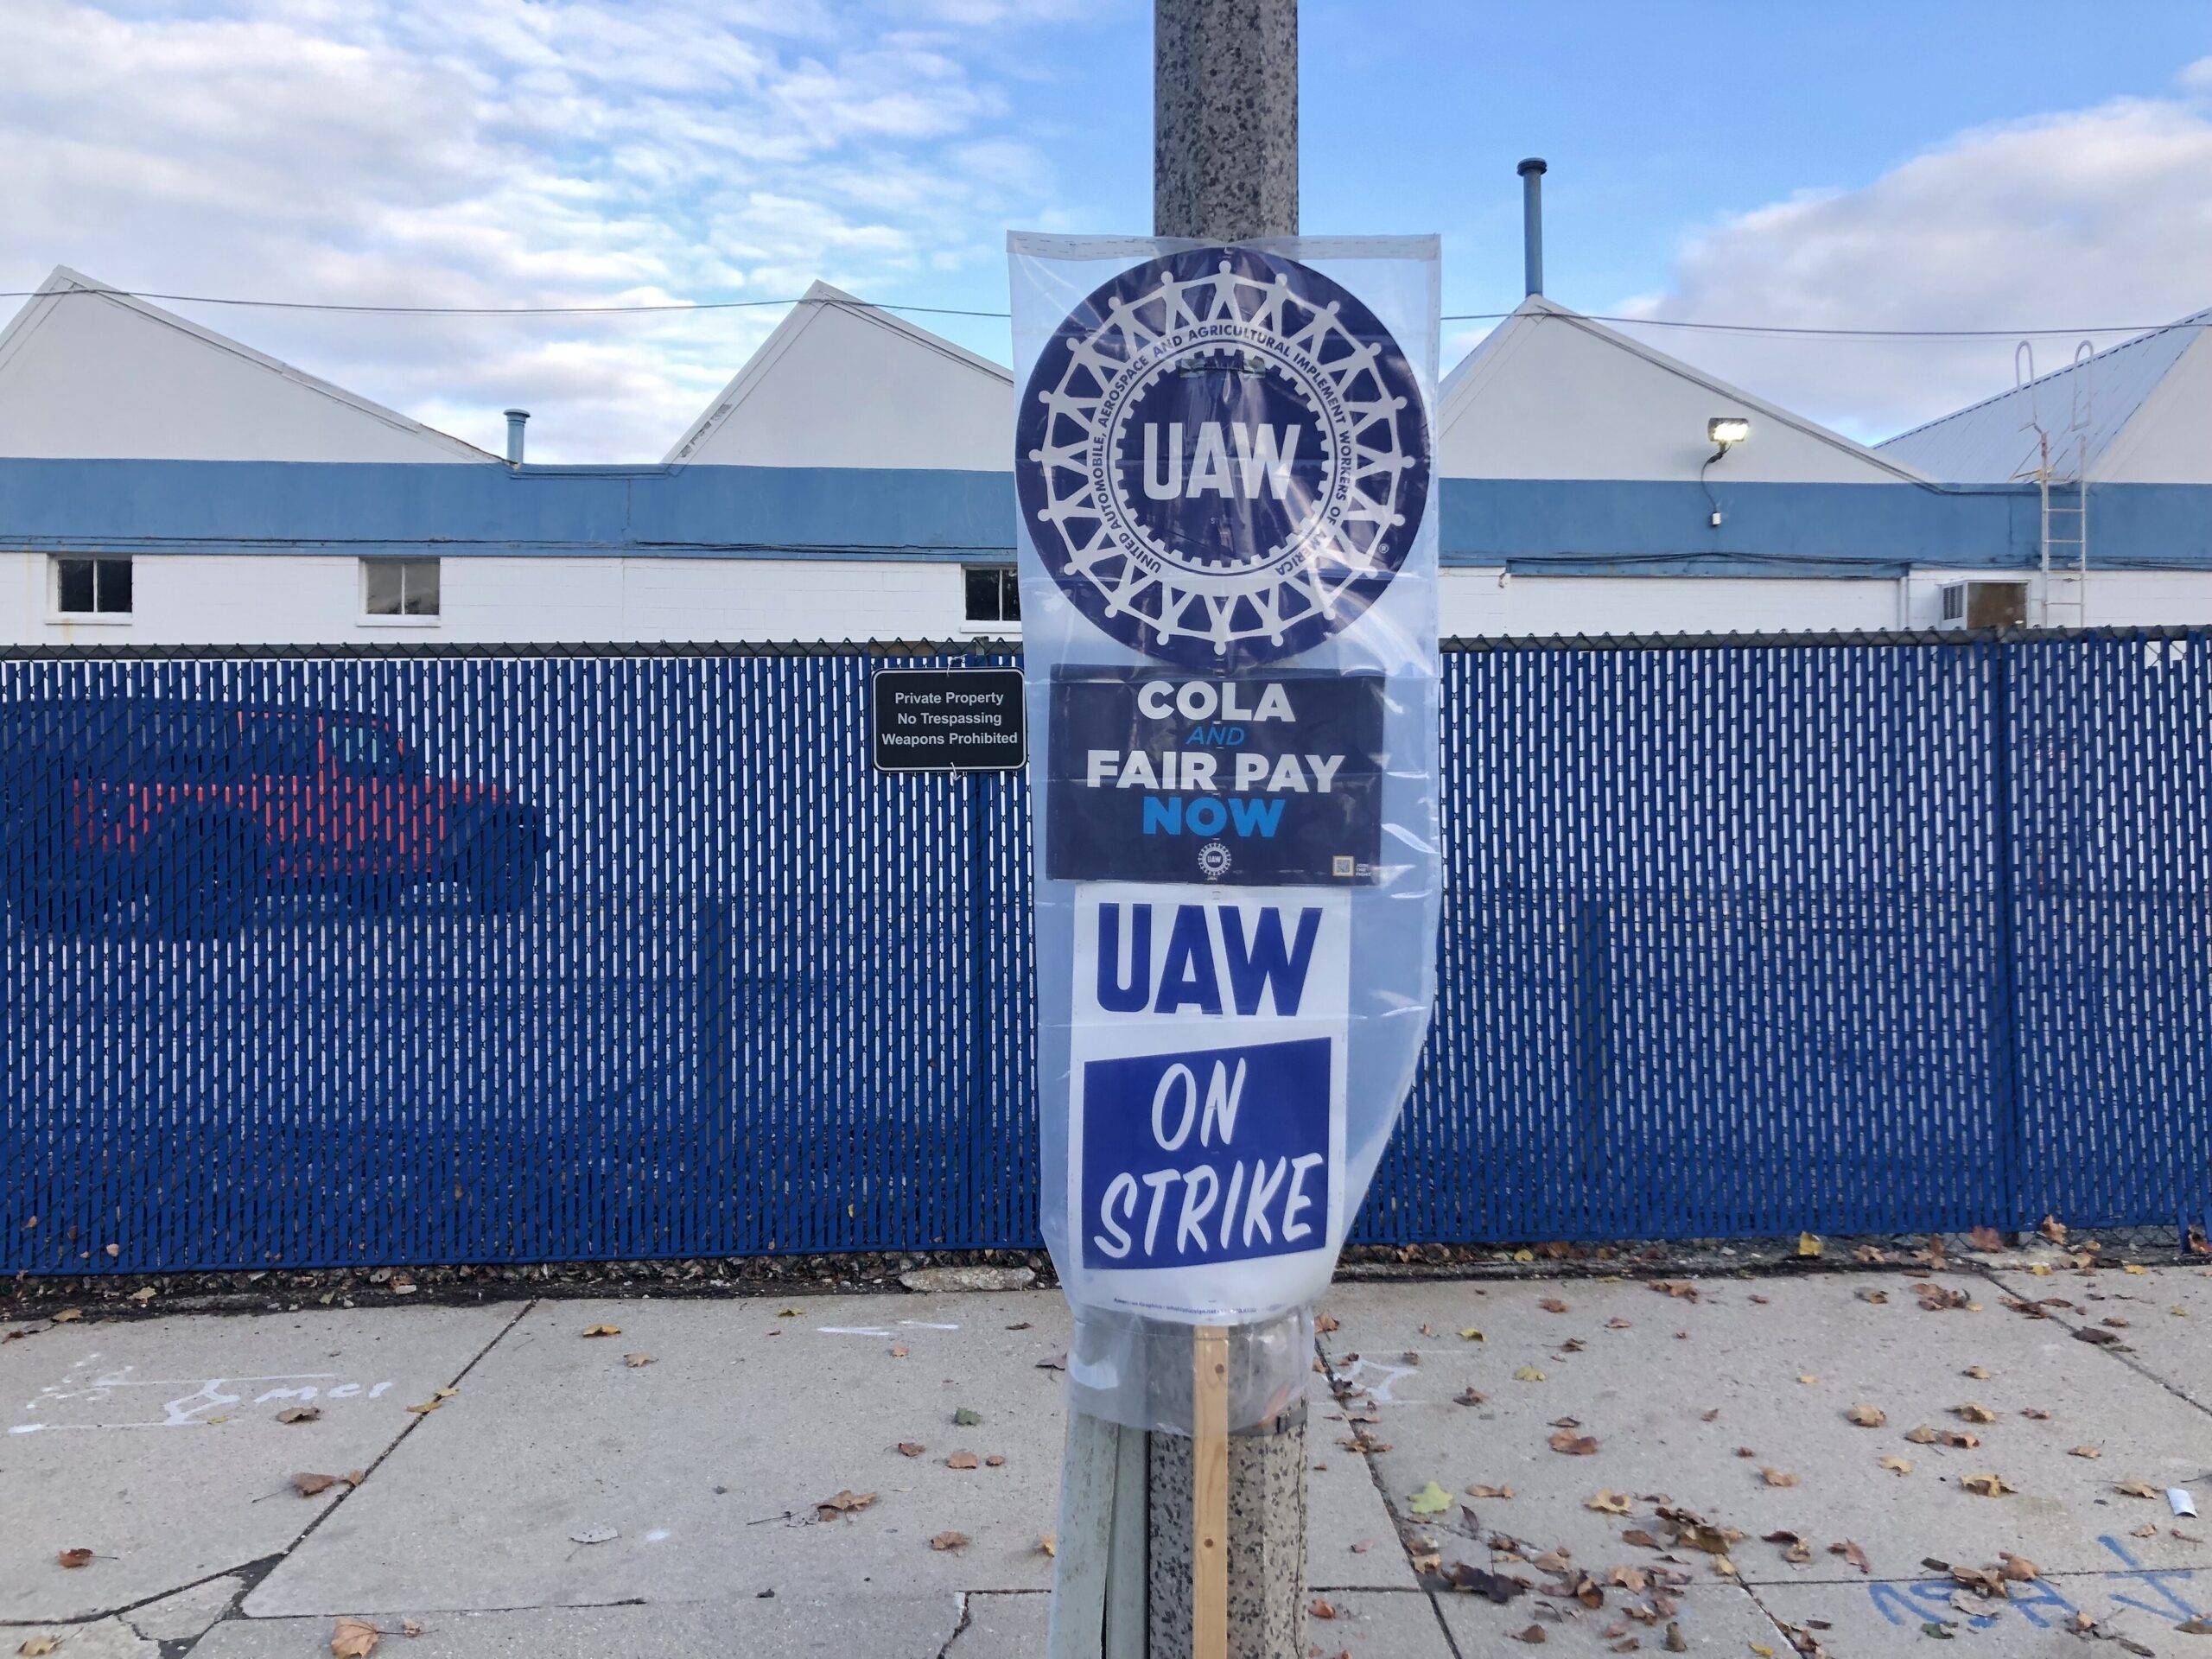 Signs attached to a pole saying "UAW on strike"